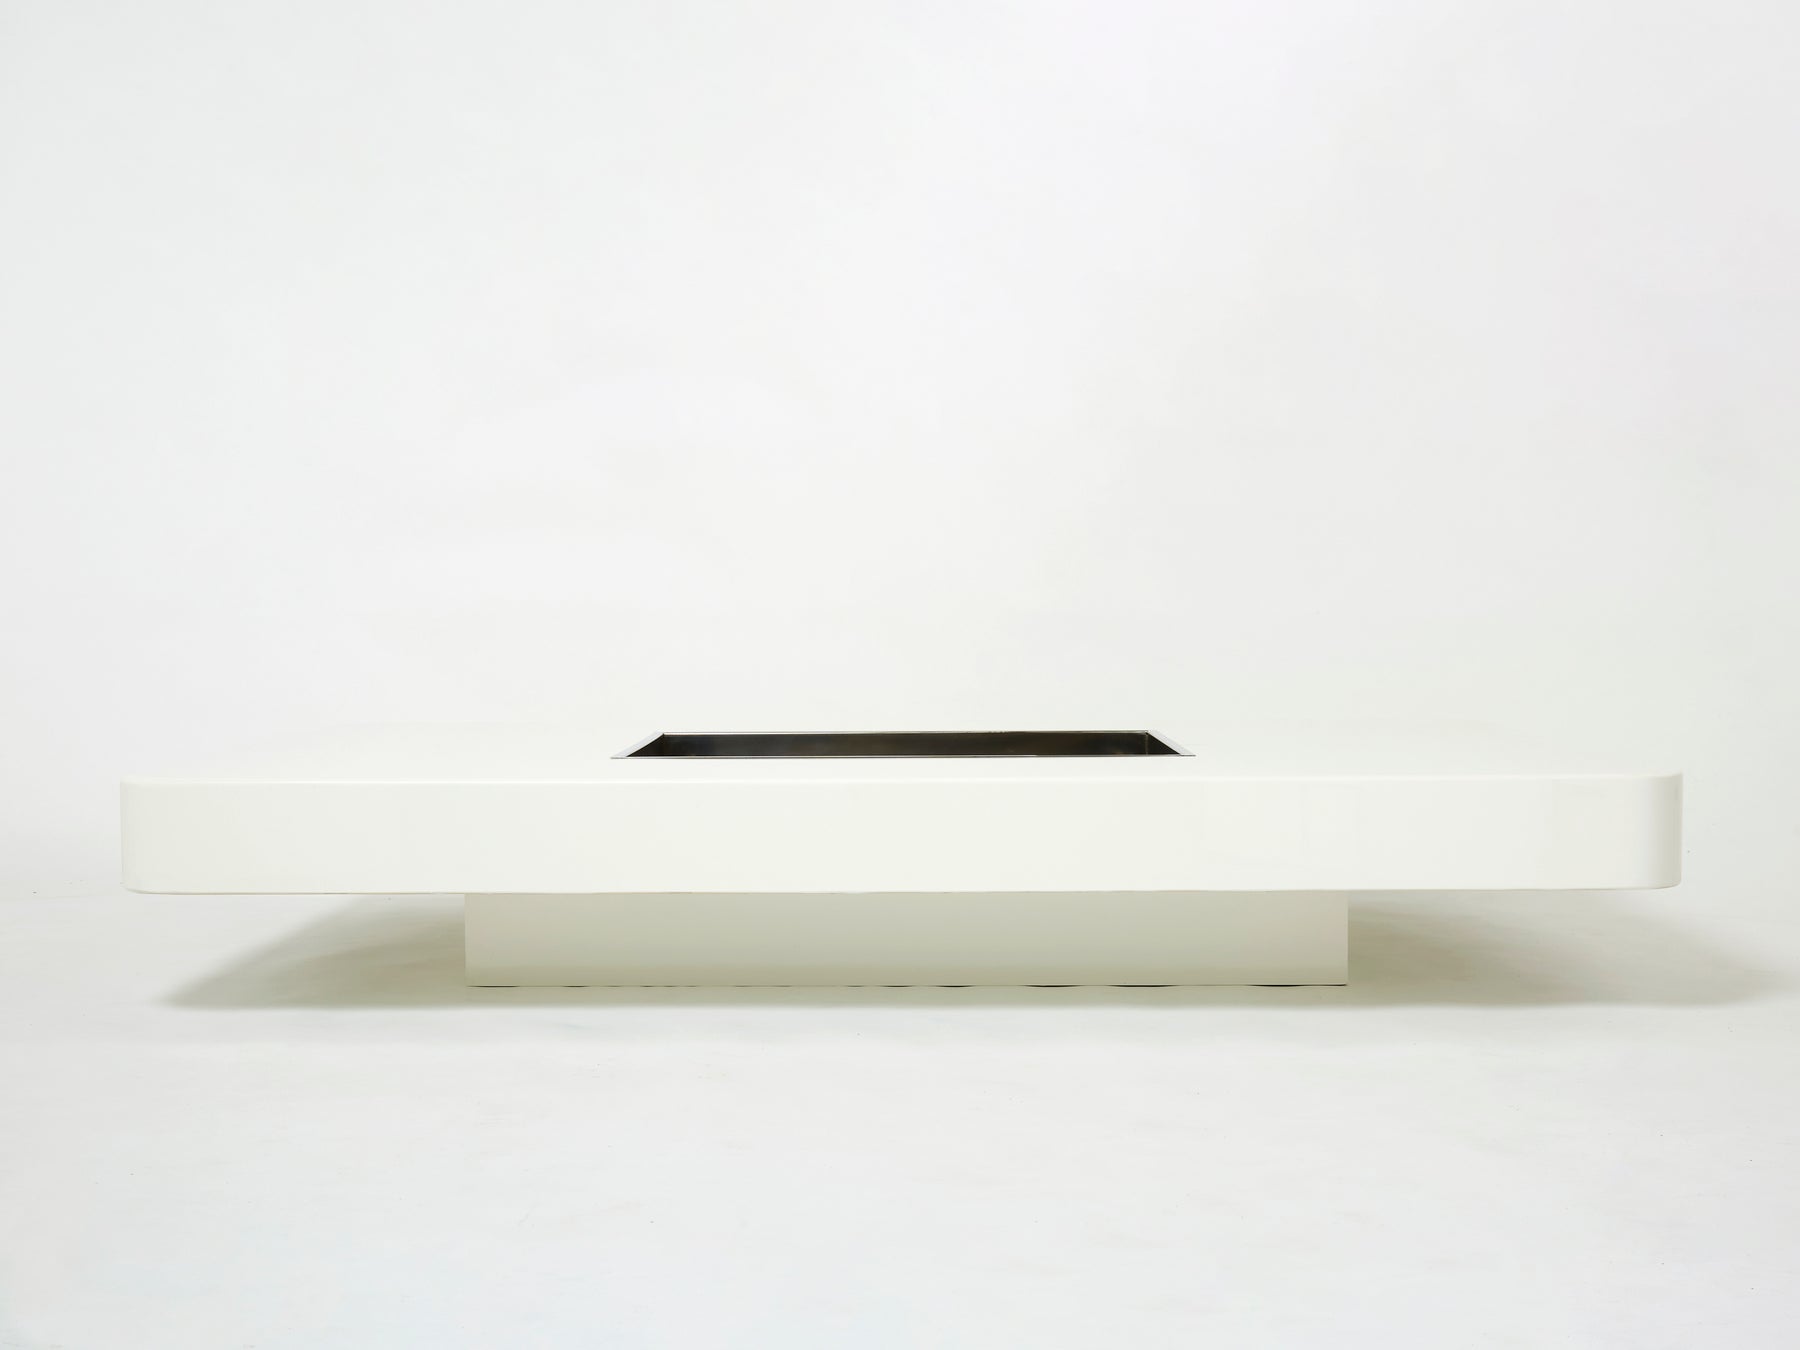 Très grande table basse de Willy Rizzo laquée blanche chrome 1970